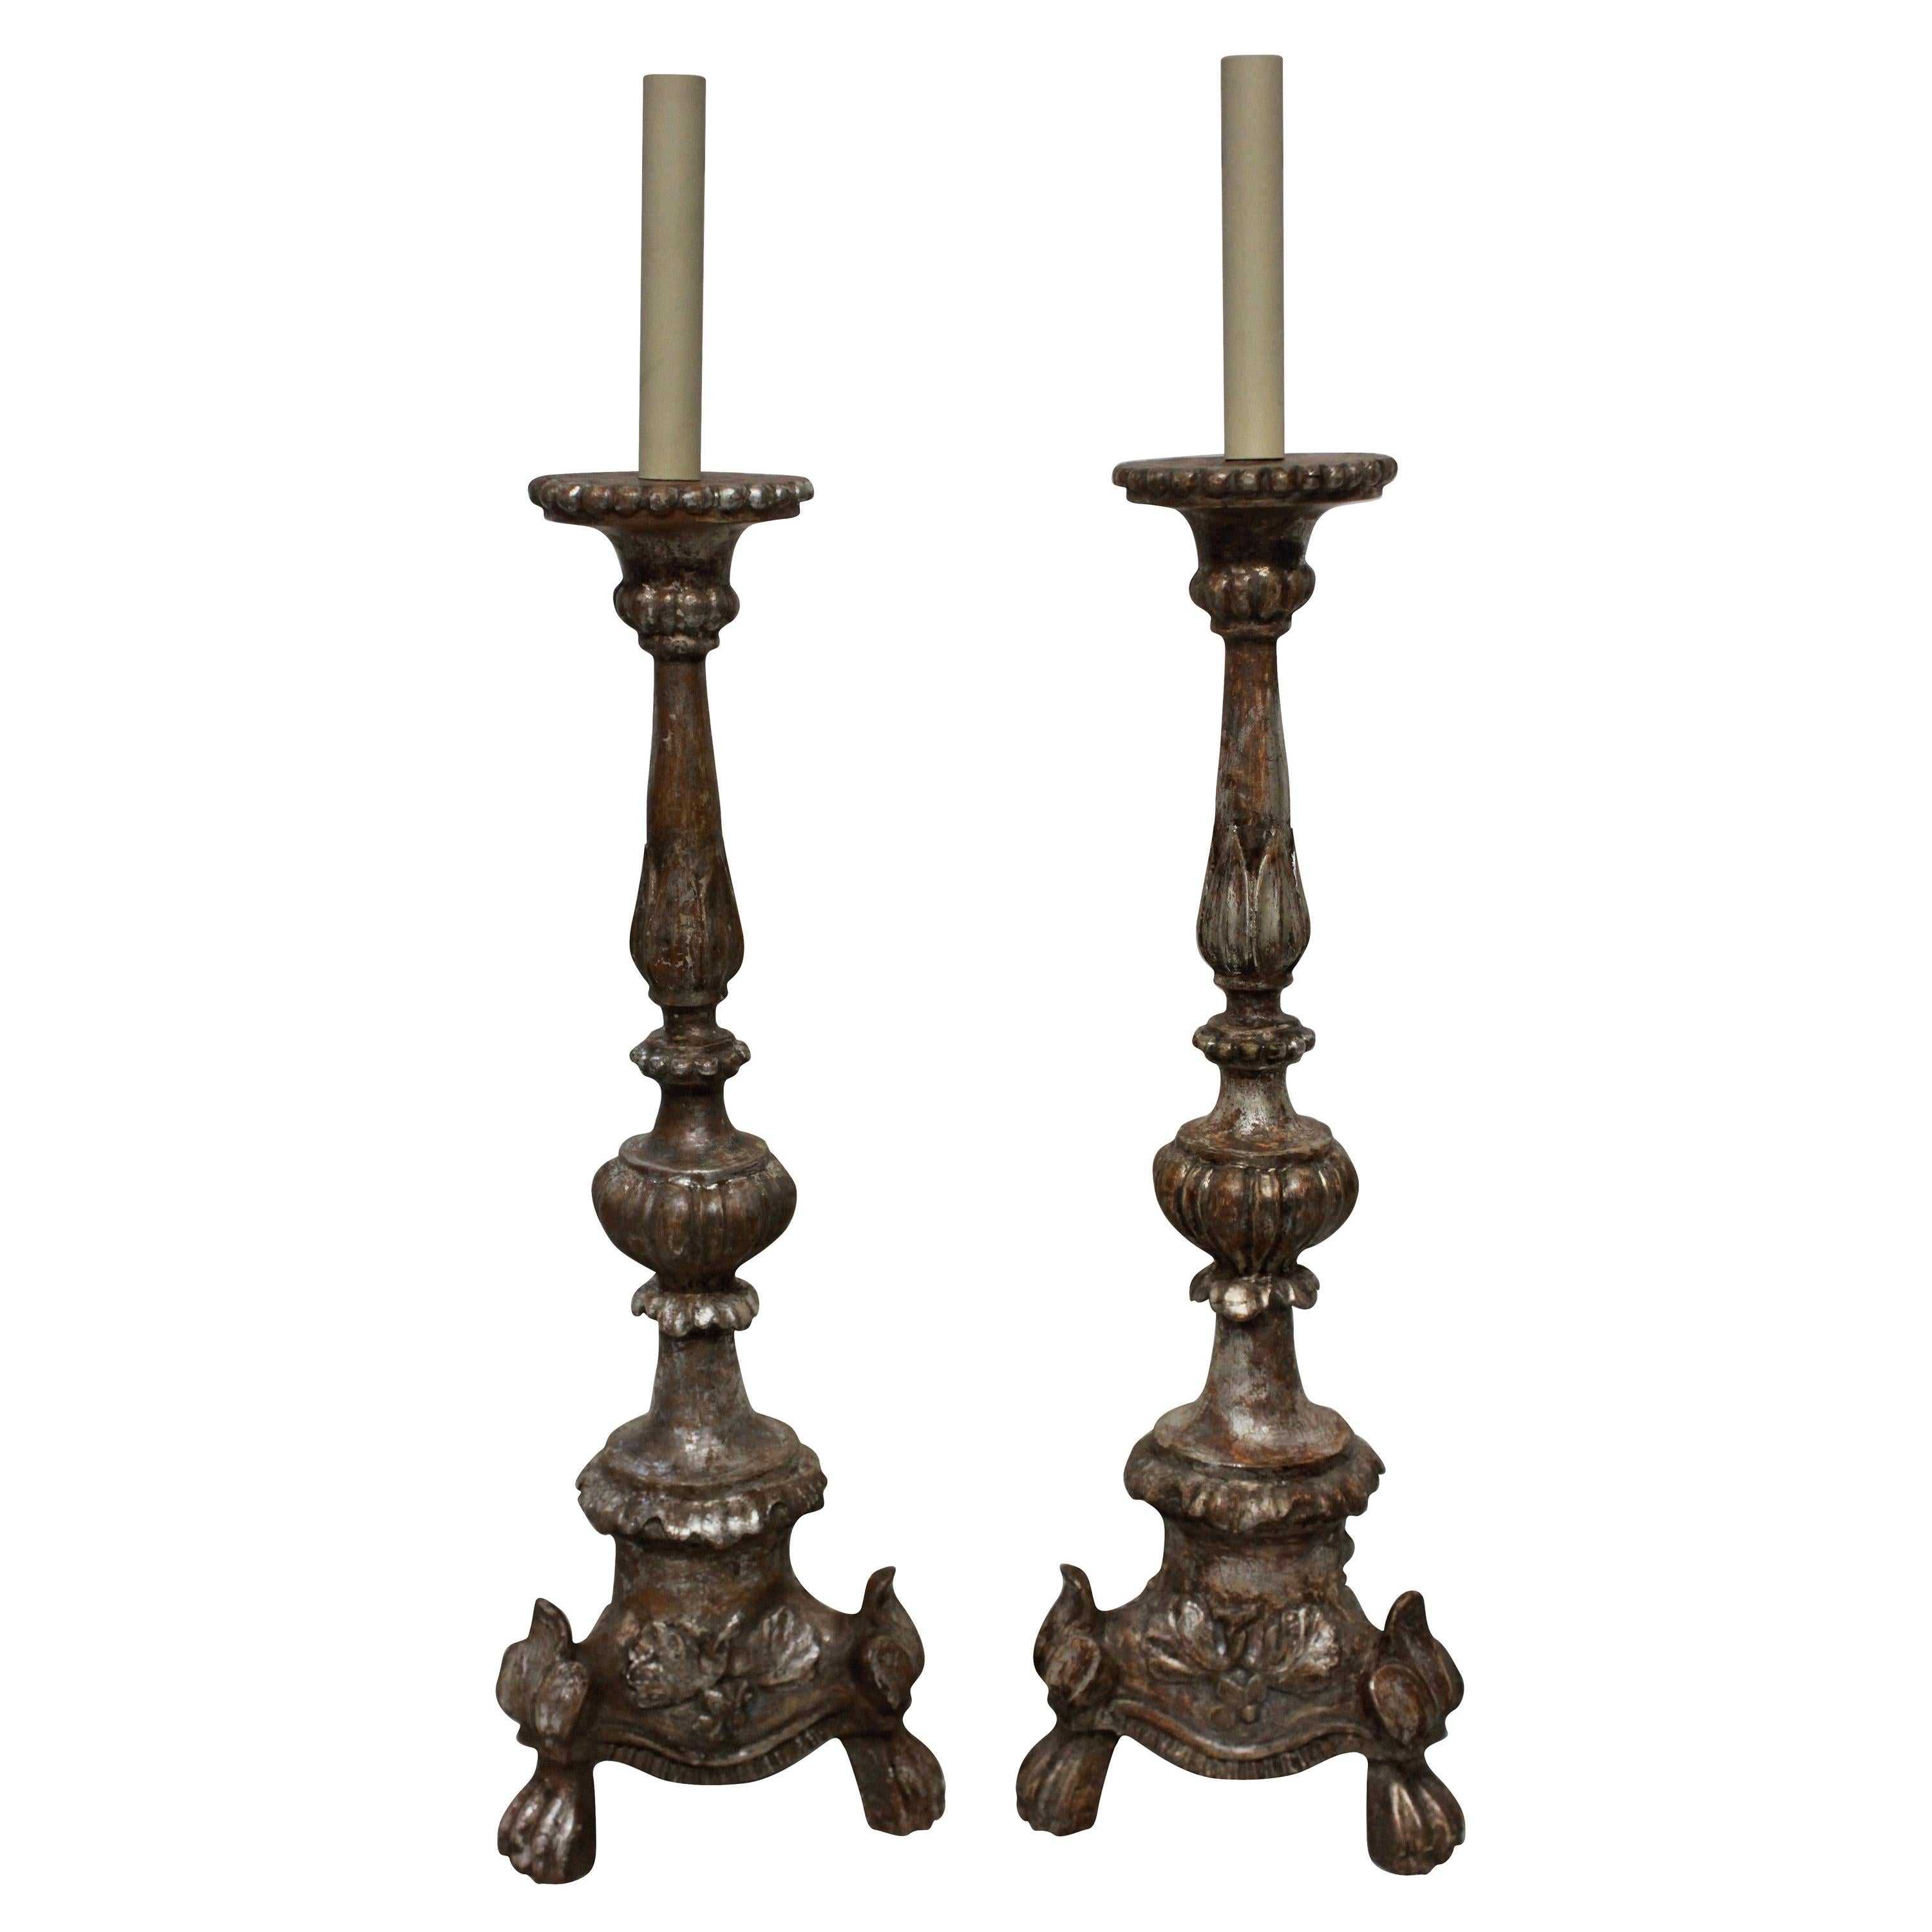 Pair of Italian 18th Century Silver Leaf Lamps